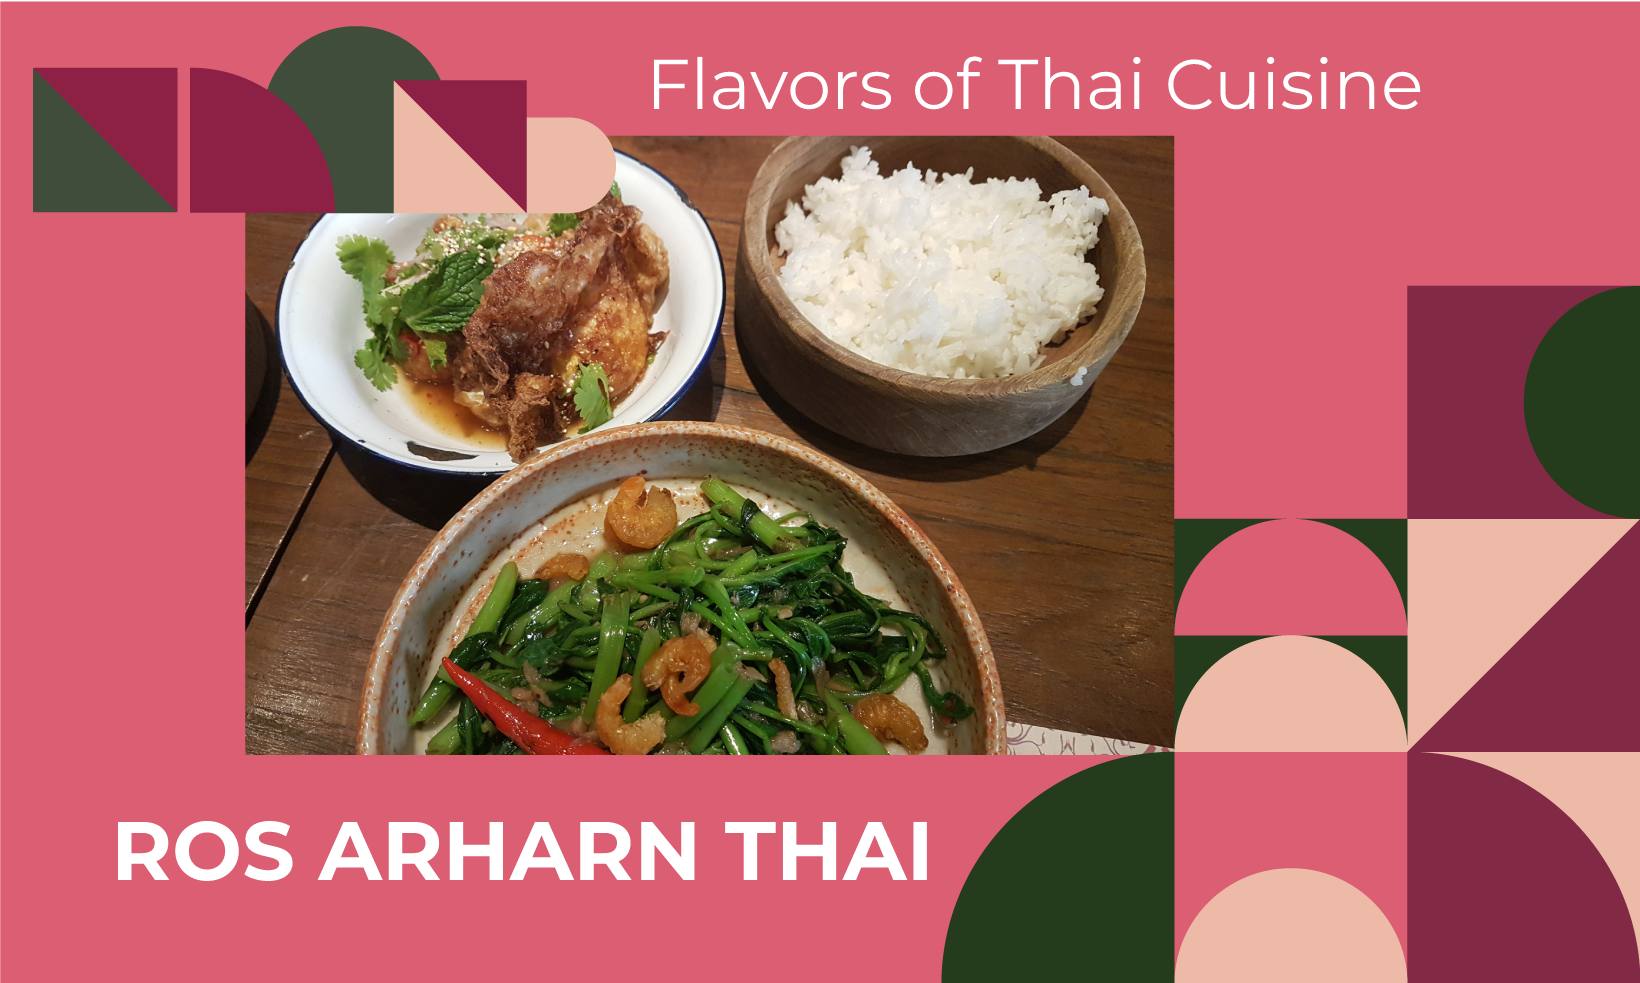 Thai food has a variety of main dishes served with rice